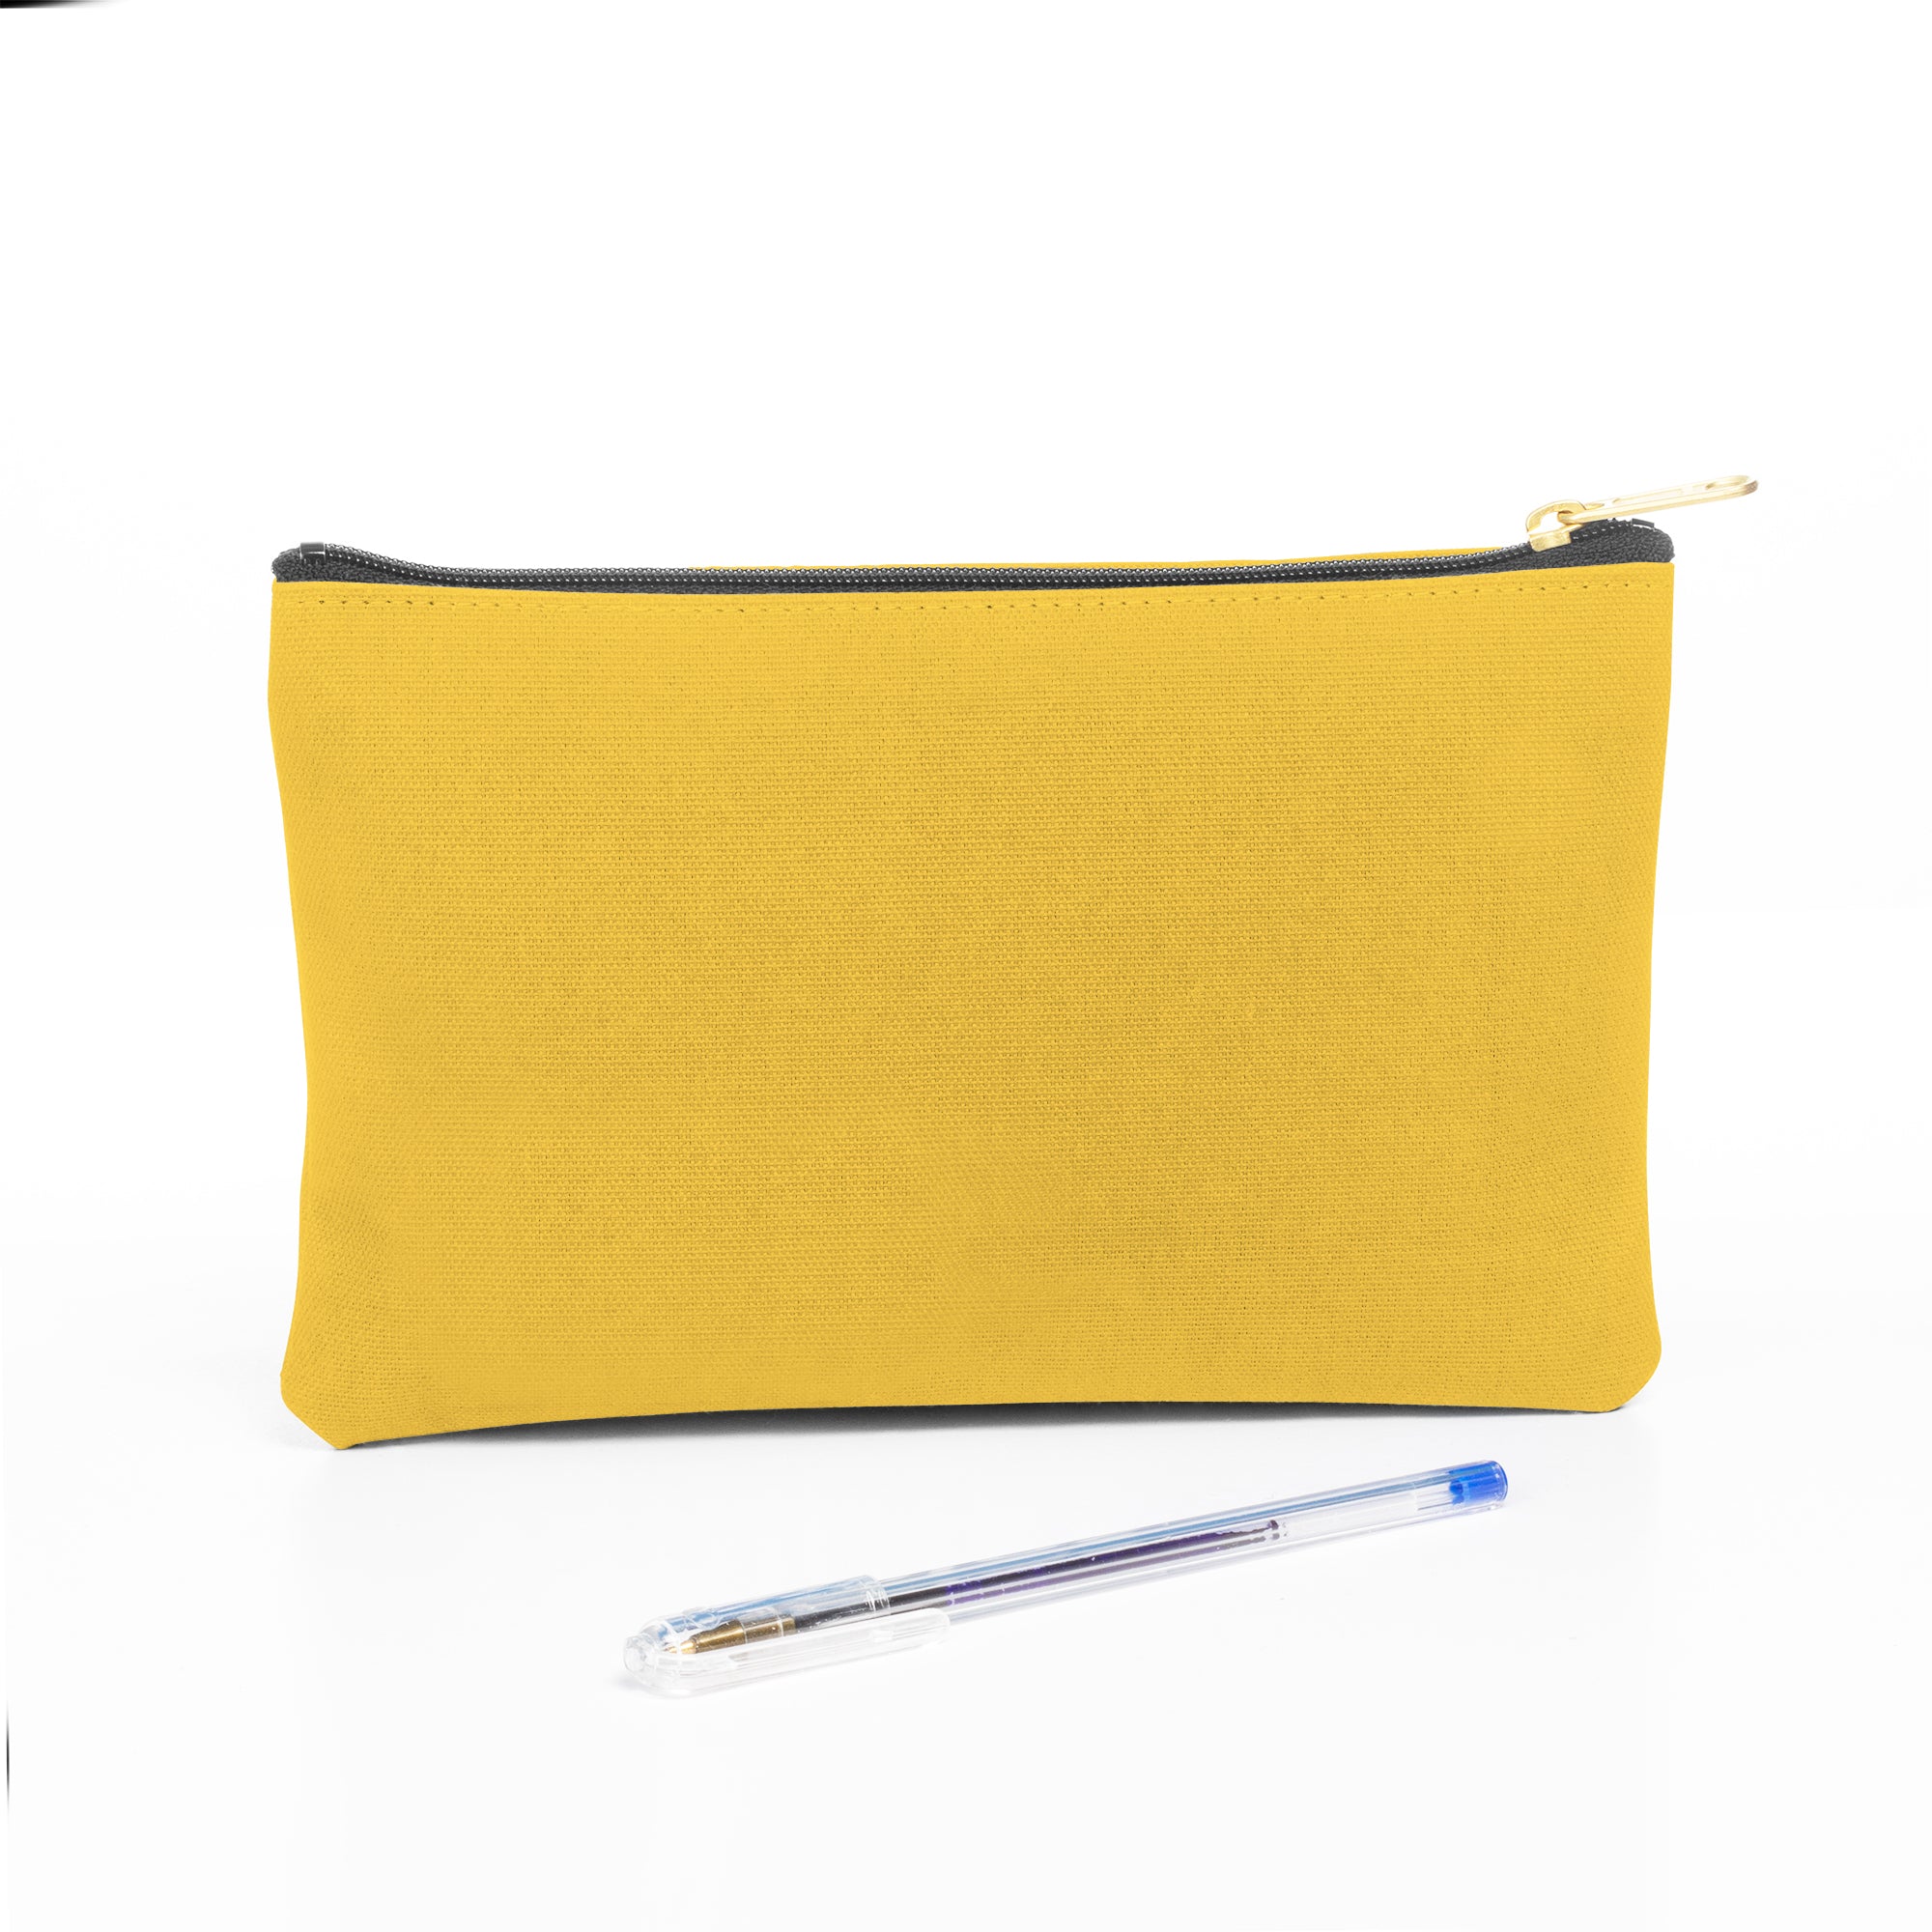 Canvas Zippered Pouch: Travel Jewelry Case, Purse Accessories